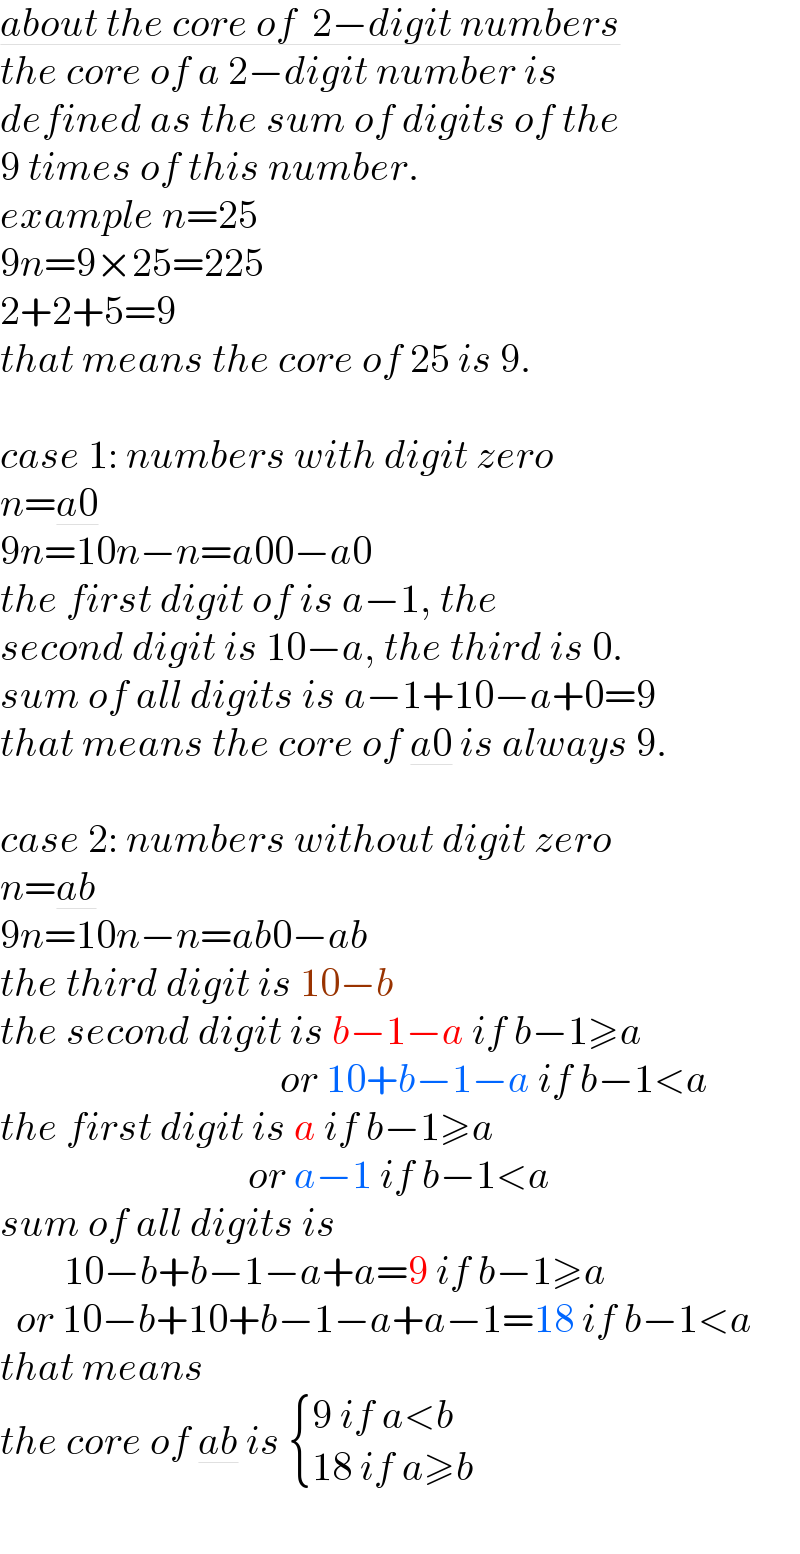 about the core of  2−digit numbers  the core of a 2−digit number is  defined as the sum of digits of the  9 times of this number.   example n=25  9n=9×25=225  2+2+5=9  that means the core of 25 is 9.    case 1: numbers with digit zero  n=a0  9n=10n−n=a00−a0  the first digit of is a−1, the  second digit is 10−a, the third is 0.  sum of all digits is a−1+10−a+0=9  that means the core of a0 is always 9.    case 2: numbers without digit zero  n=ab  9n=10n−n=ab0−ab  the third digit is 10−b  the second digit is b−1−a if b−1≥a                                     or 10+b−1−a if b−1<a  the first digit is a if b−1≥a                                 or a−1 if b−1<a  sum of all digits is           10−b+b−1−a+a=9 if b−1≥a    or 10−b+10+b−1−a+a−1=18 if b−1<a  that means   the core of ab is  { ((9 if a<b)),((18 if a≥b)) :}  